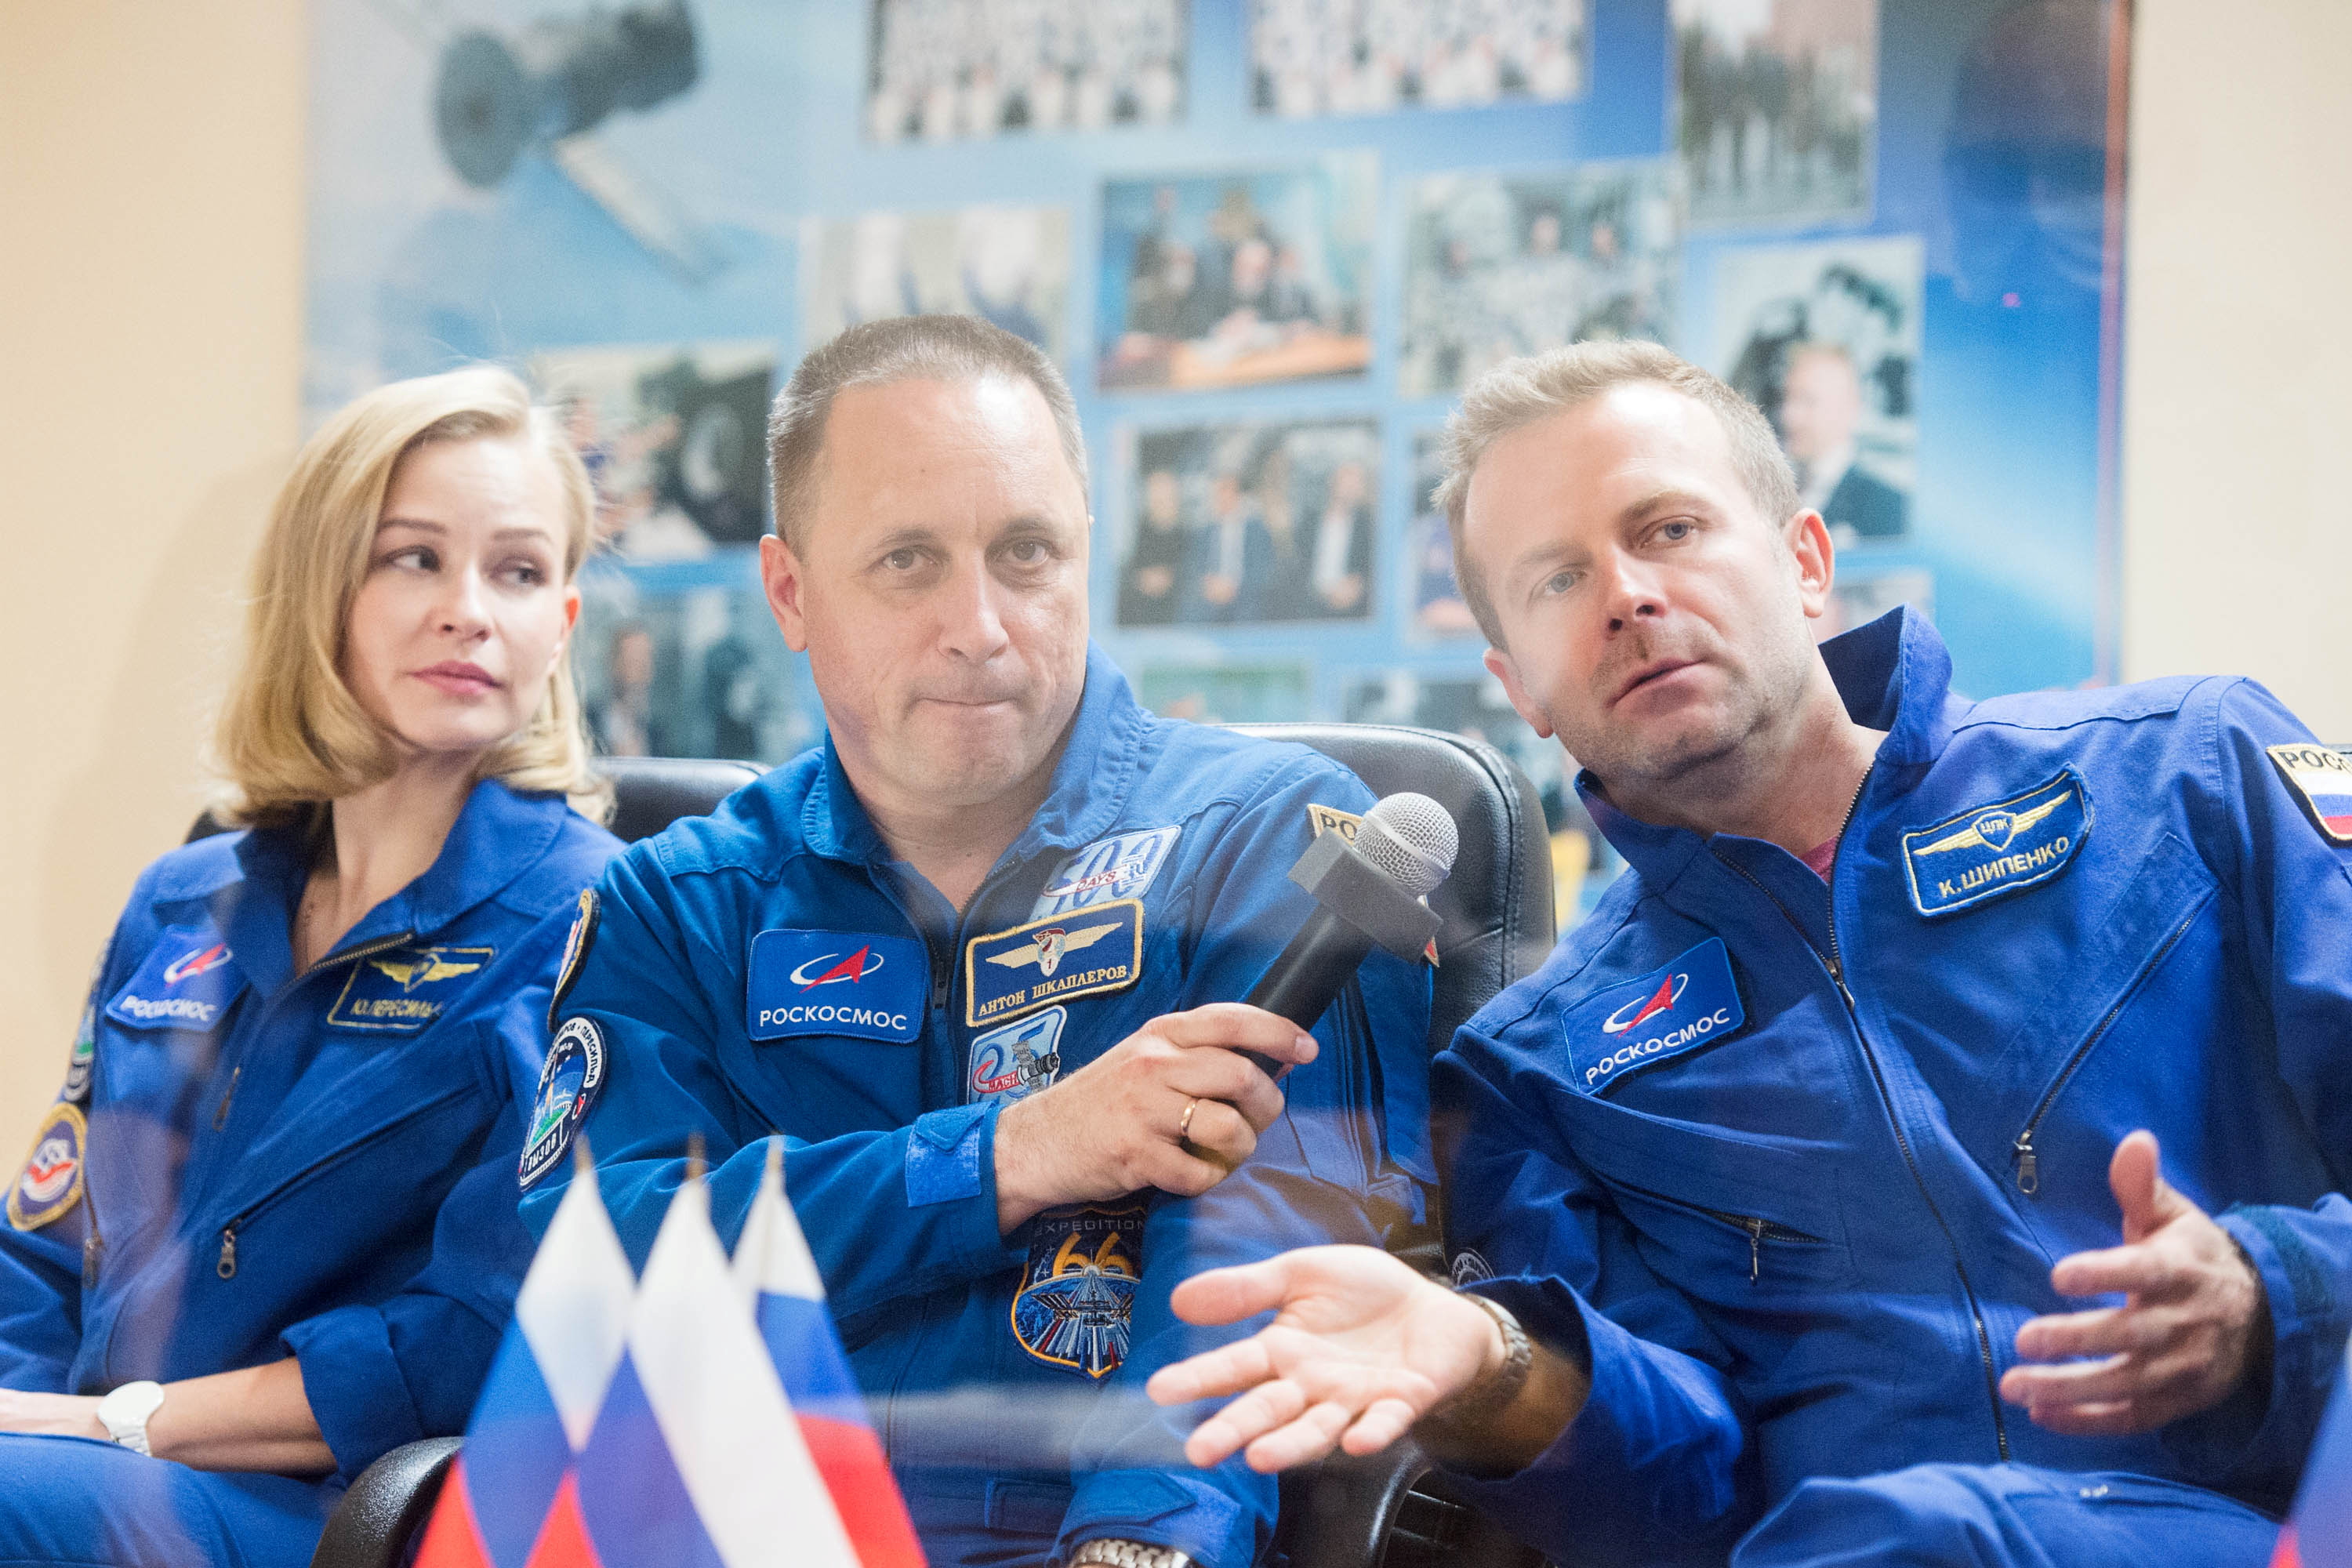 Crew members, cosmonaut Anton Shkaplerov, actress Yulia Peresild and film director Klim Shipenko, answer questions behind a glass wall during a news conference ahead of the expedition to the International Space Station (ISS) at the Baikonur Cosmodrome, Kazakhstan October 4, 2021. The launch is scheduled for October 5, 2021. Andrey Shelepin/GCTC/Roscosmos/Handout via REUTERS  